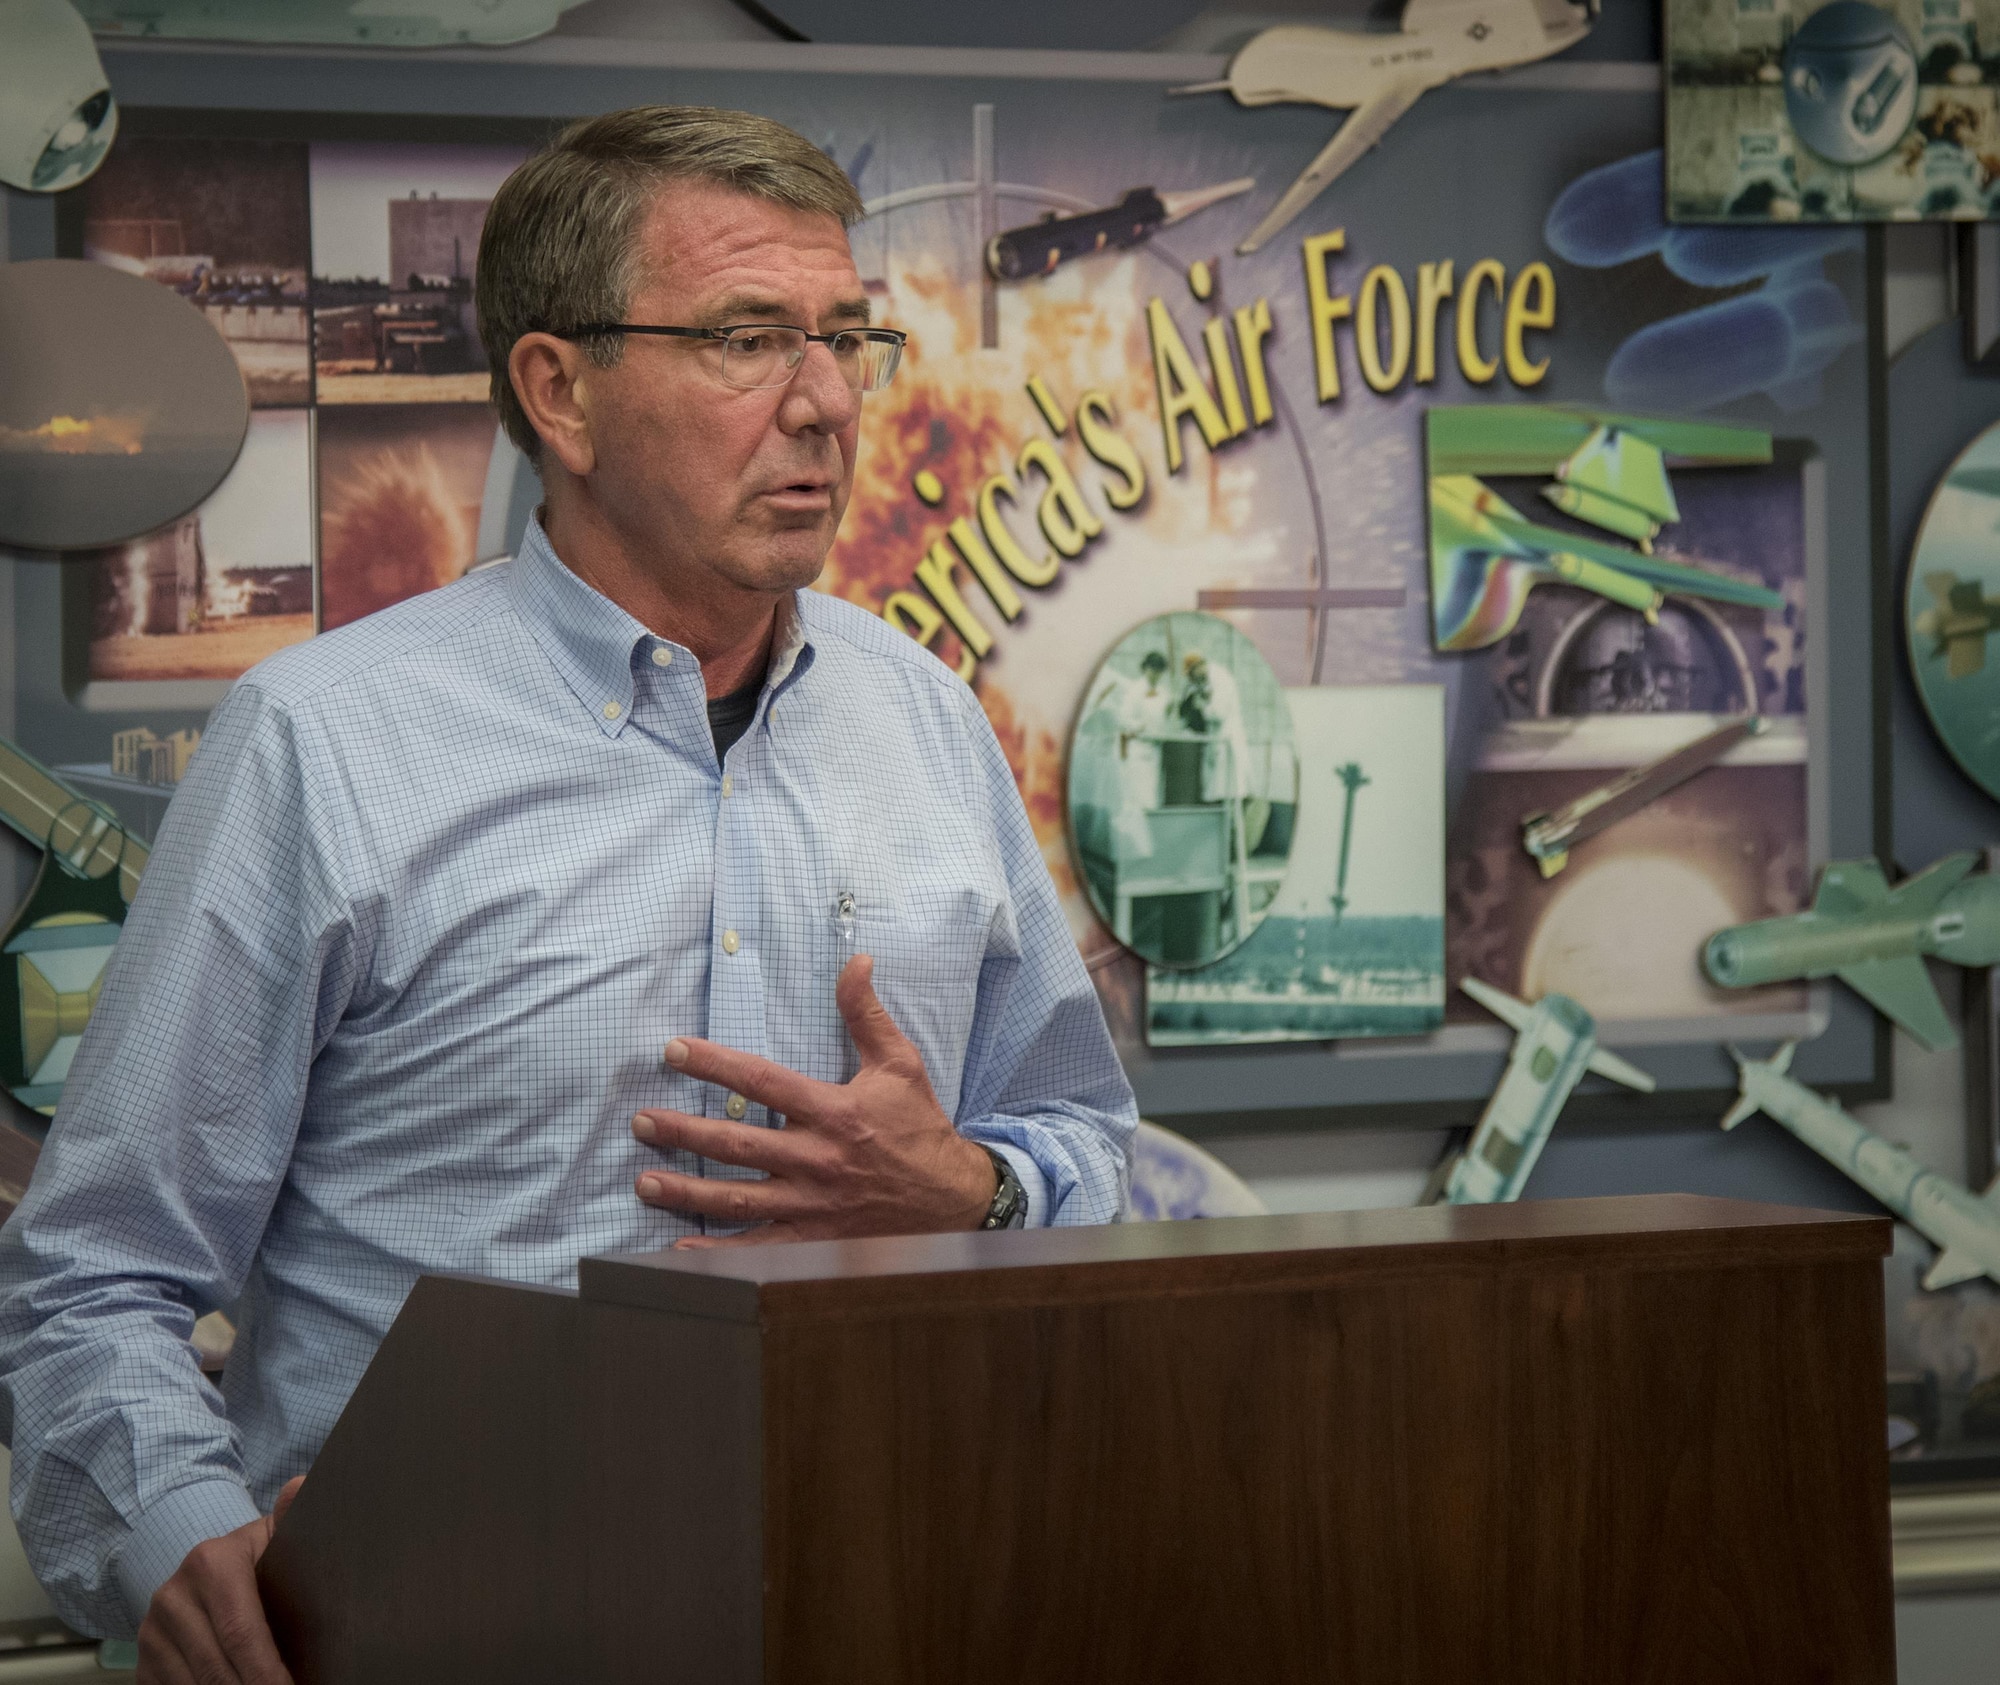 Secretary of Defense Ash Carter speaks with media about his visit to the local Air Force bases Nov. 17 at Eglin Air Force Base, Fla. Nov. 17.  Carter visited numerous locations around Eglin and Hurlburt Field during his day tour of the local area. (U.S. Air Force photo/Samuel King Jr.)